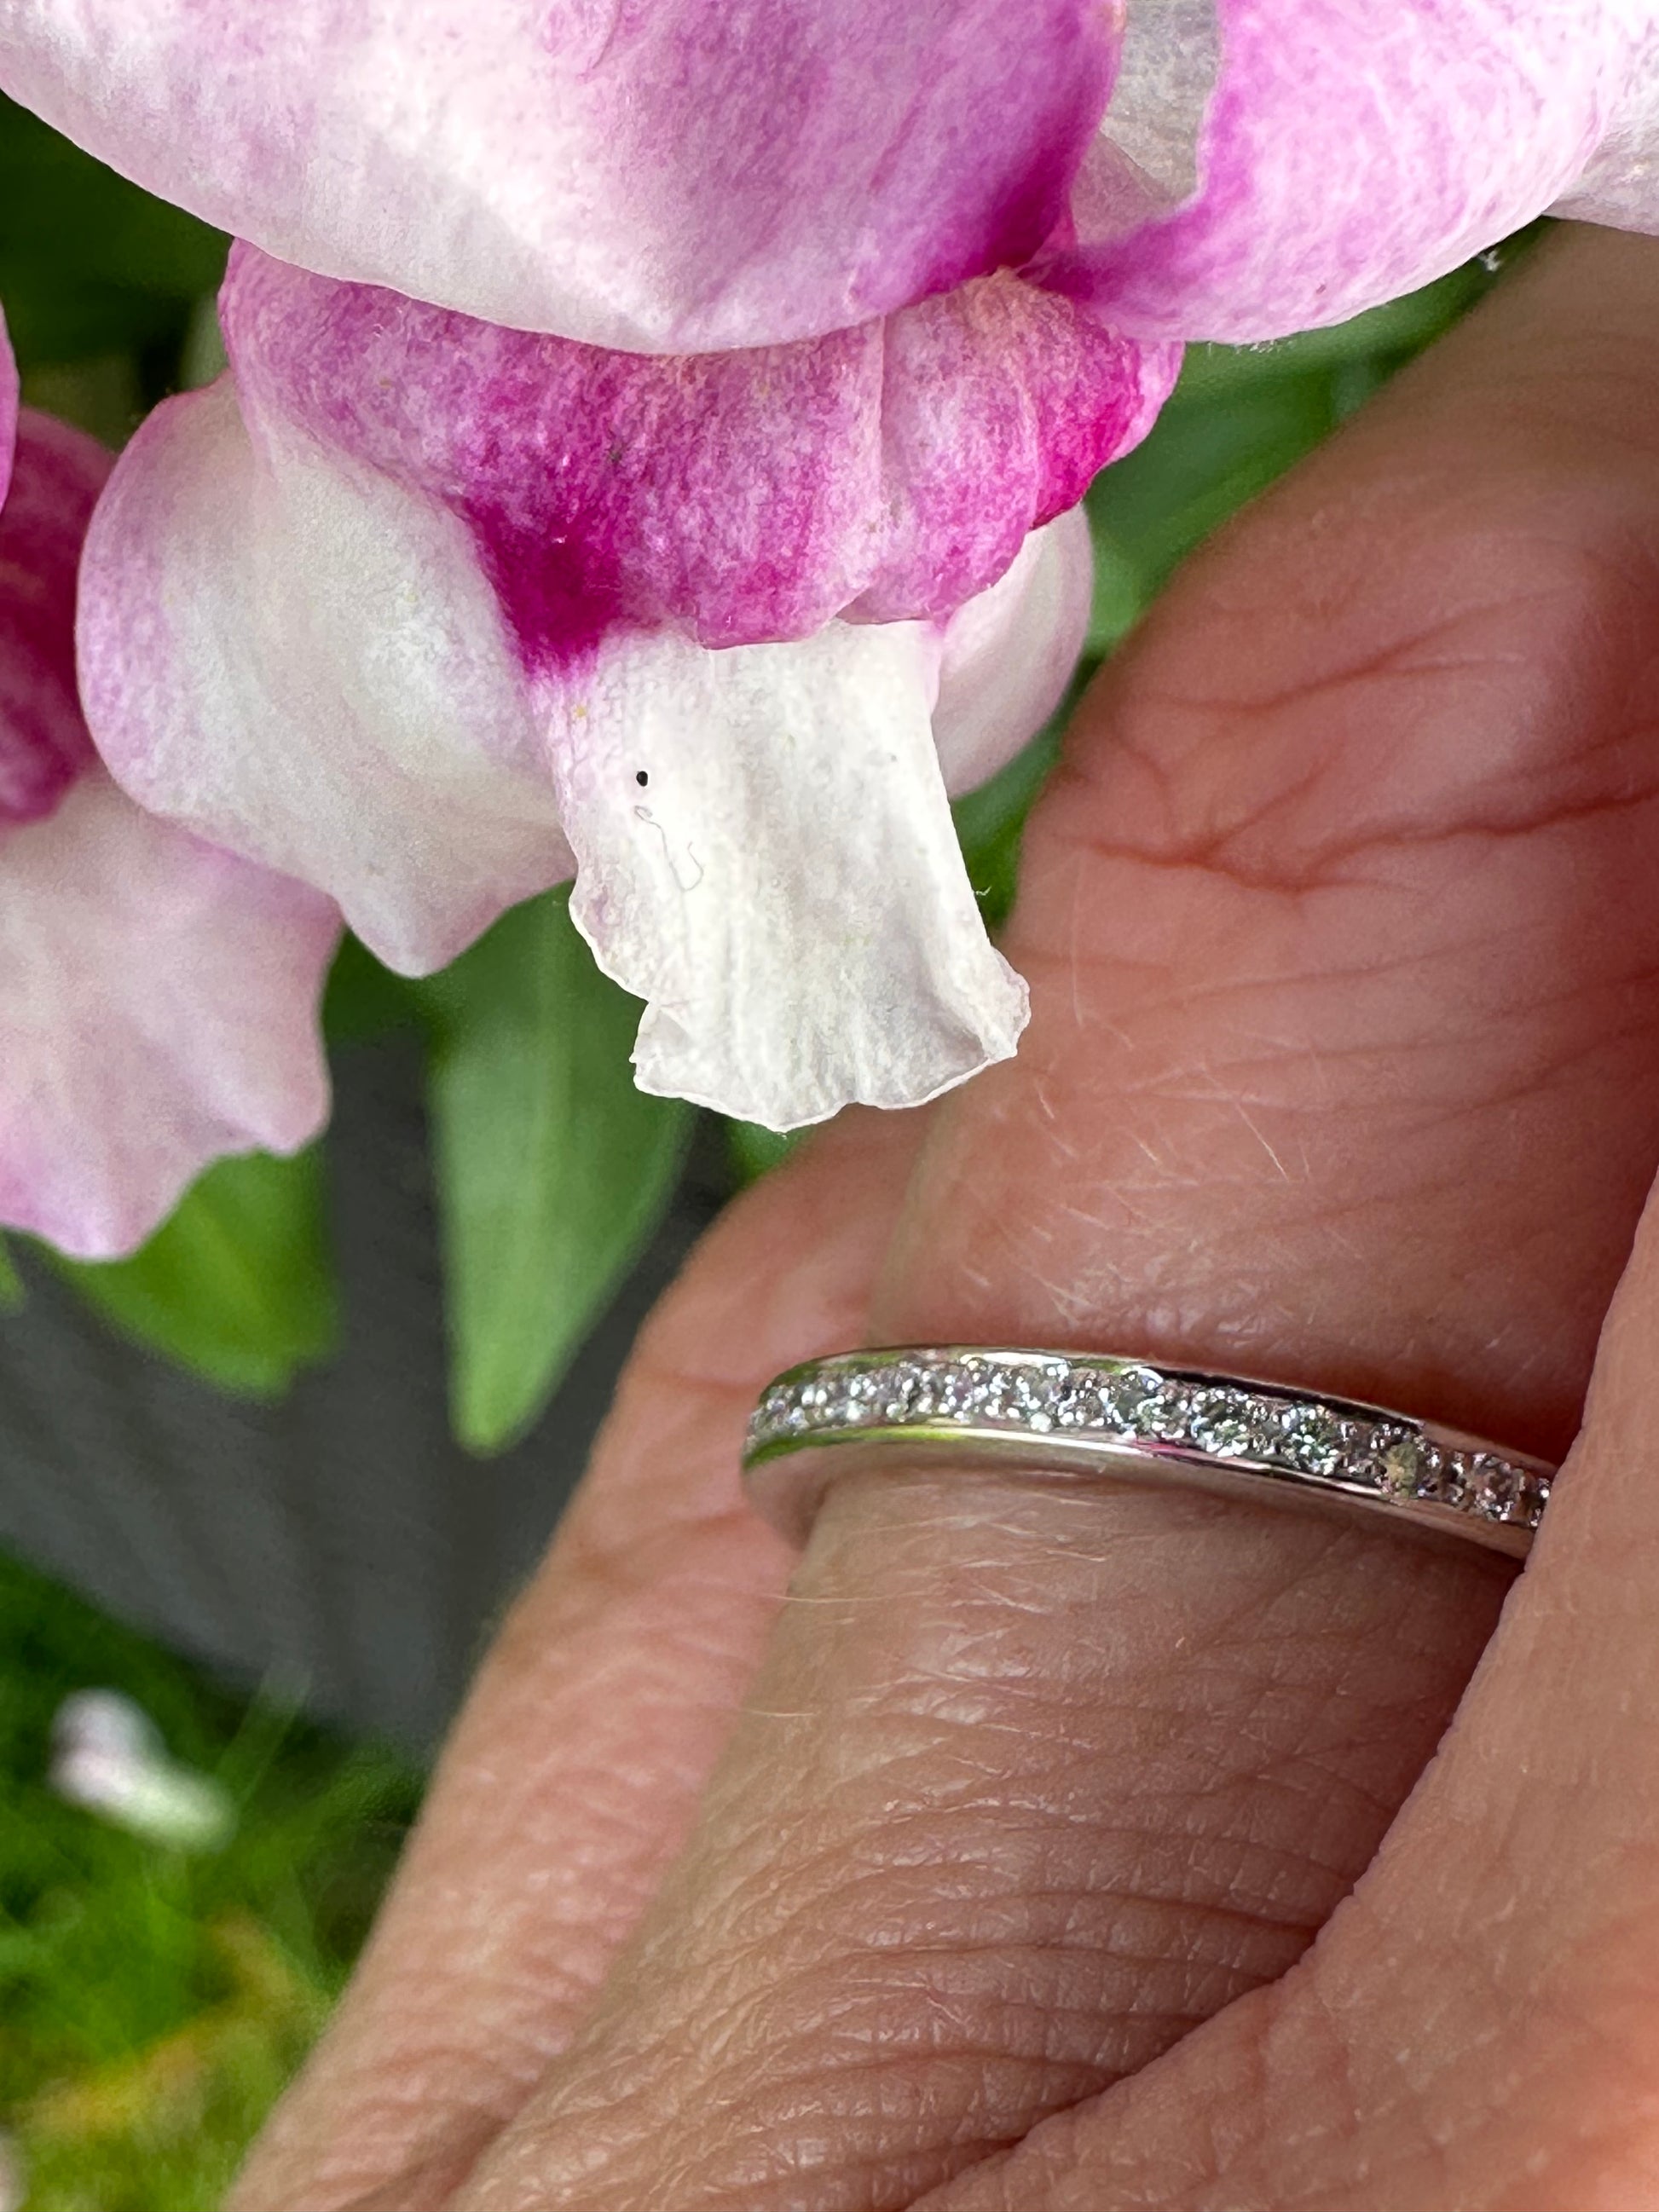 18ct white gold and diamond grain set full eternity ring Ring Not specified   